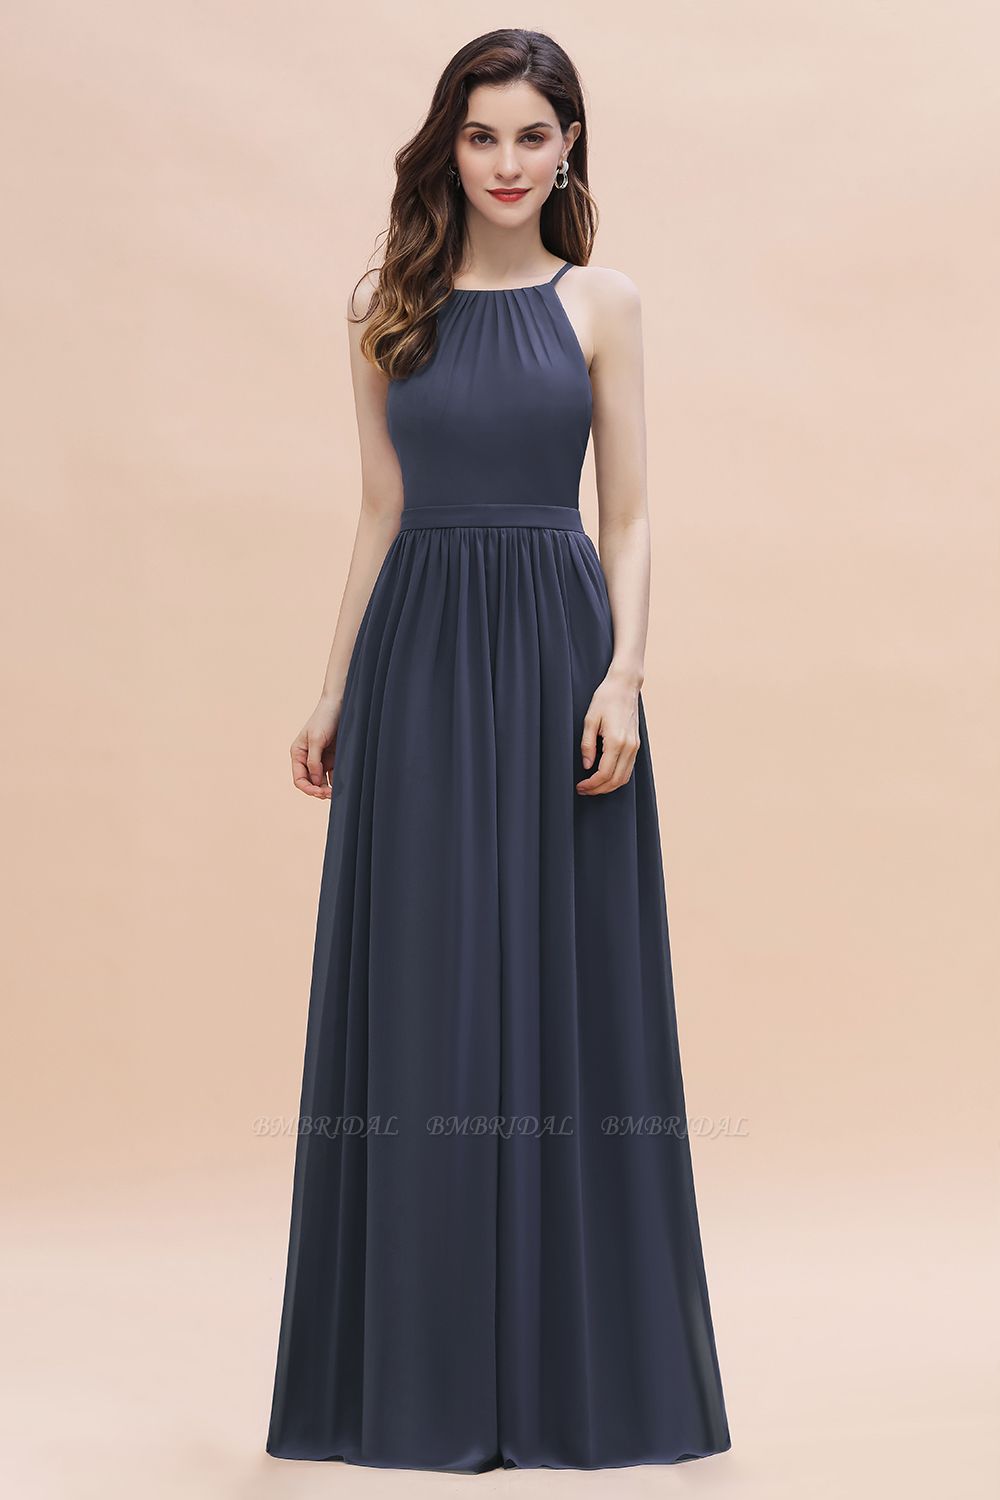 BMbridal Affordable Jewel Sleeveless Stormy Chiffon Bridesmaid Dress with Ruffles Online